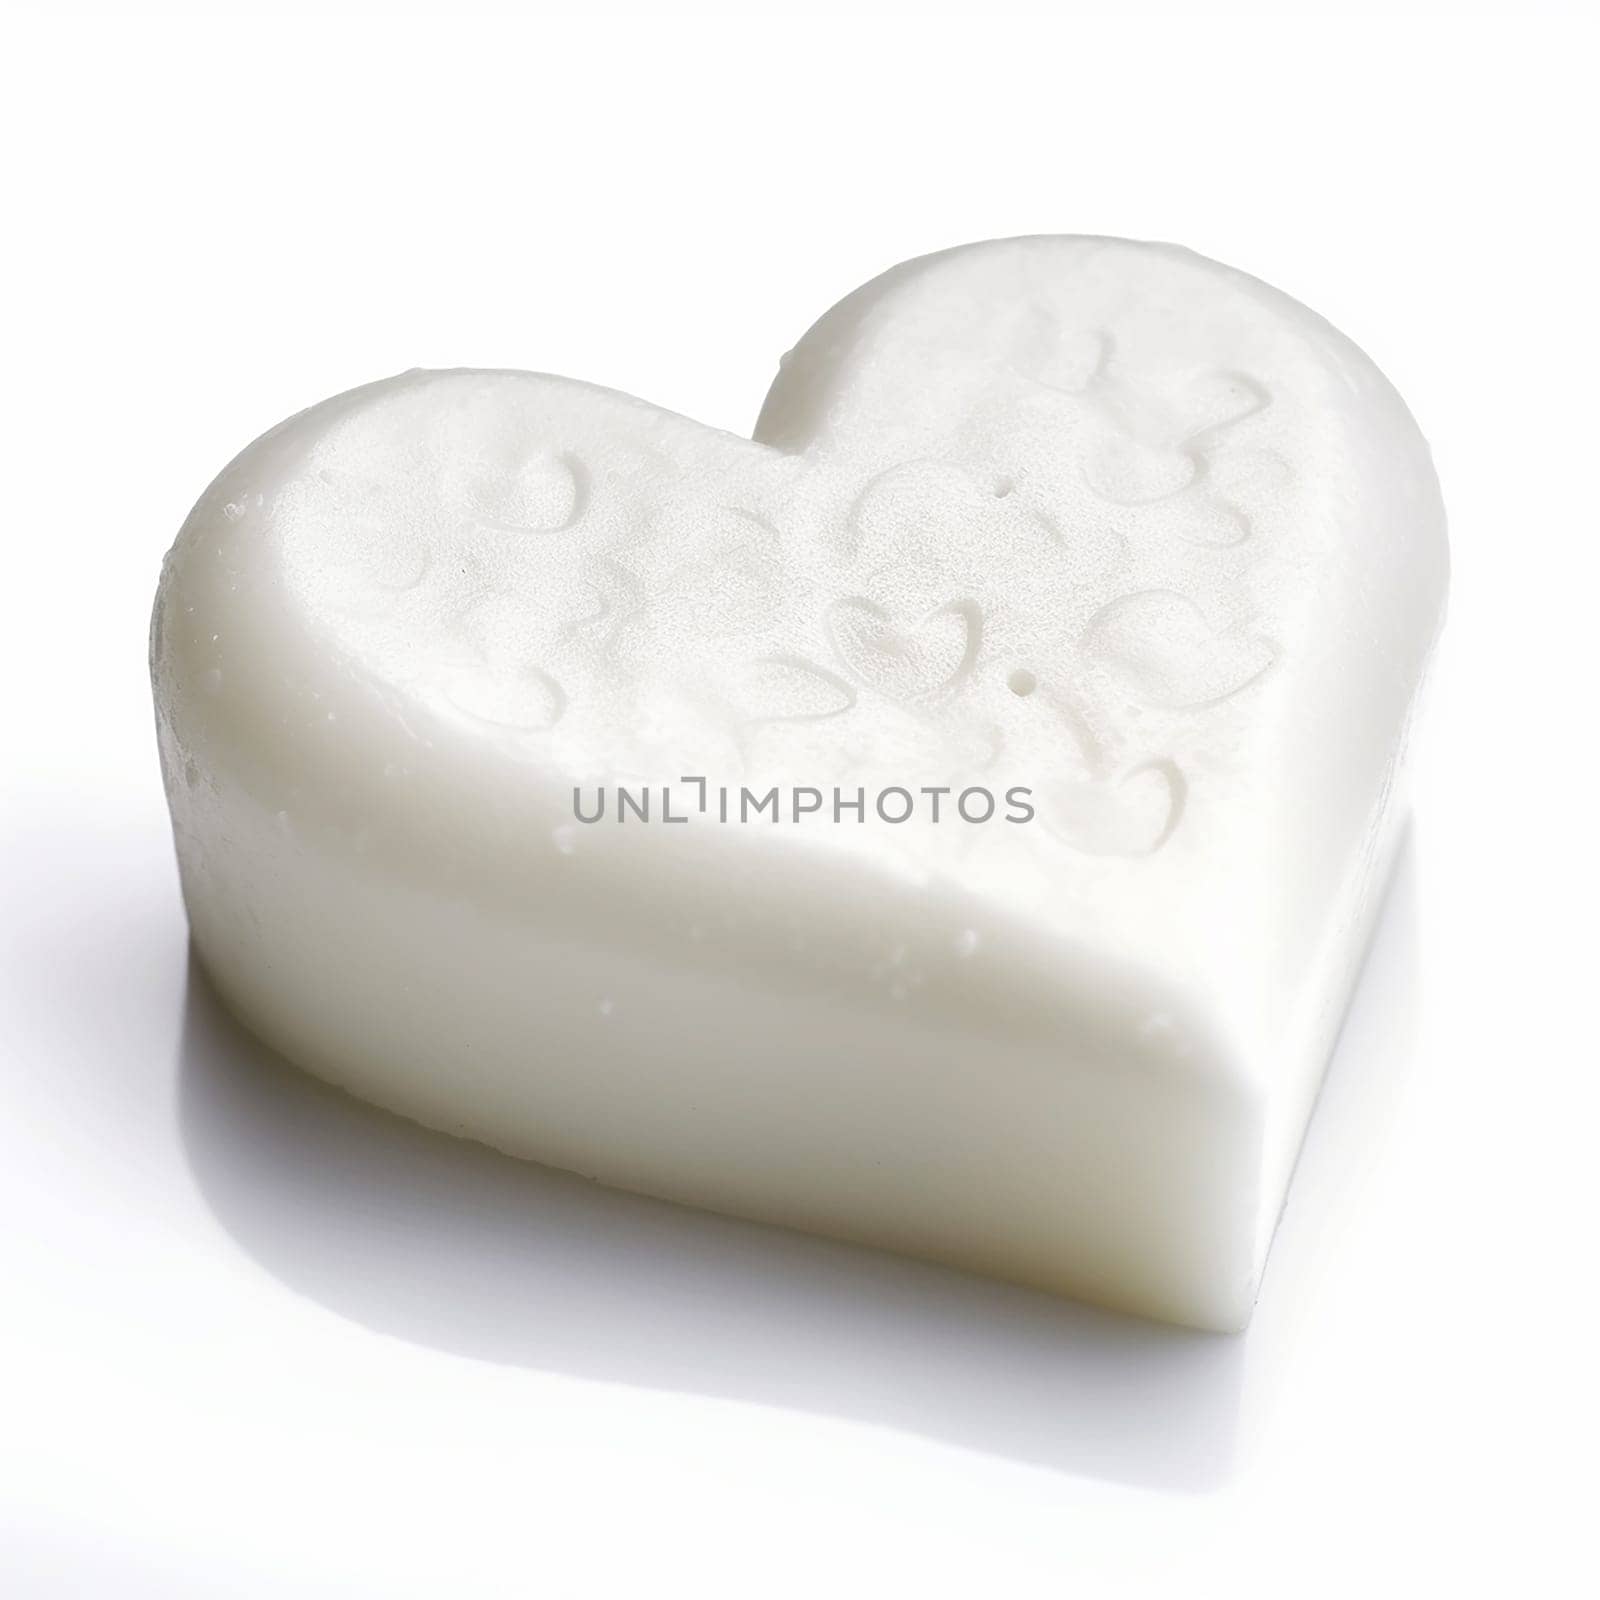 White heart-shaped soap with ornate details on white background.